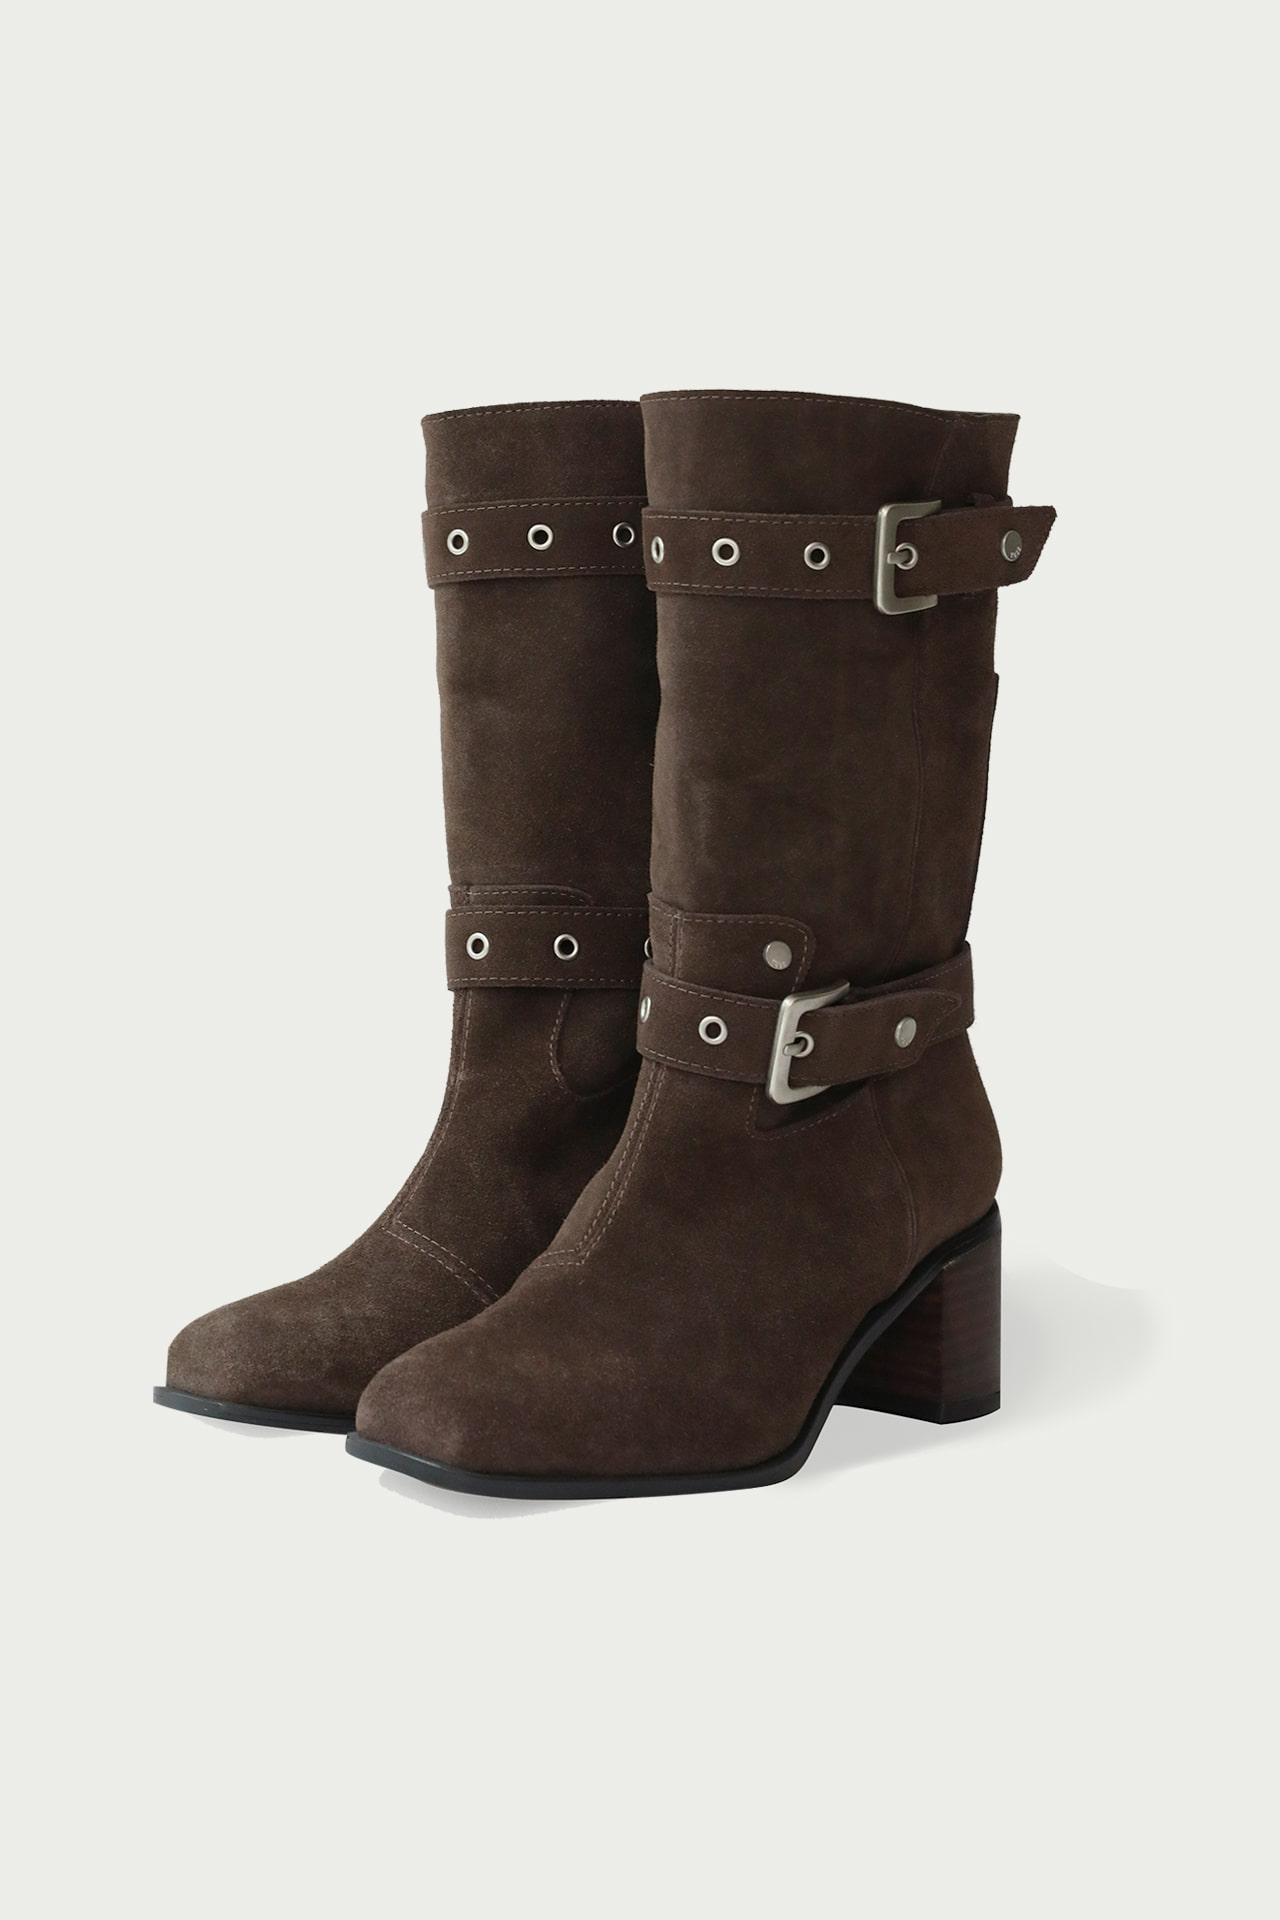 COW HIDE SUEDE BETLED BOOTS - BROWN